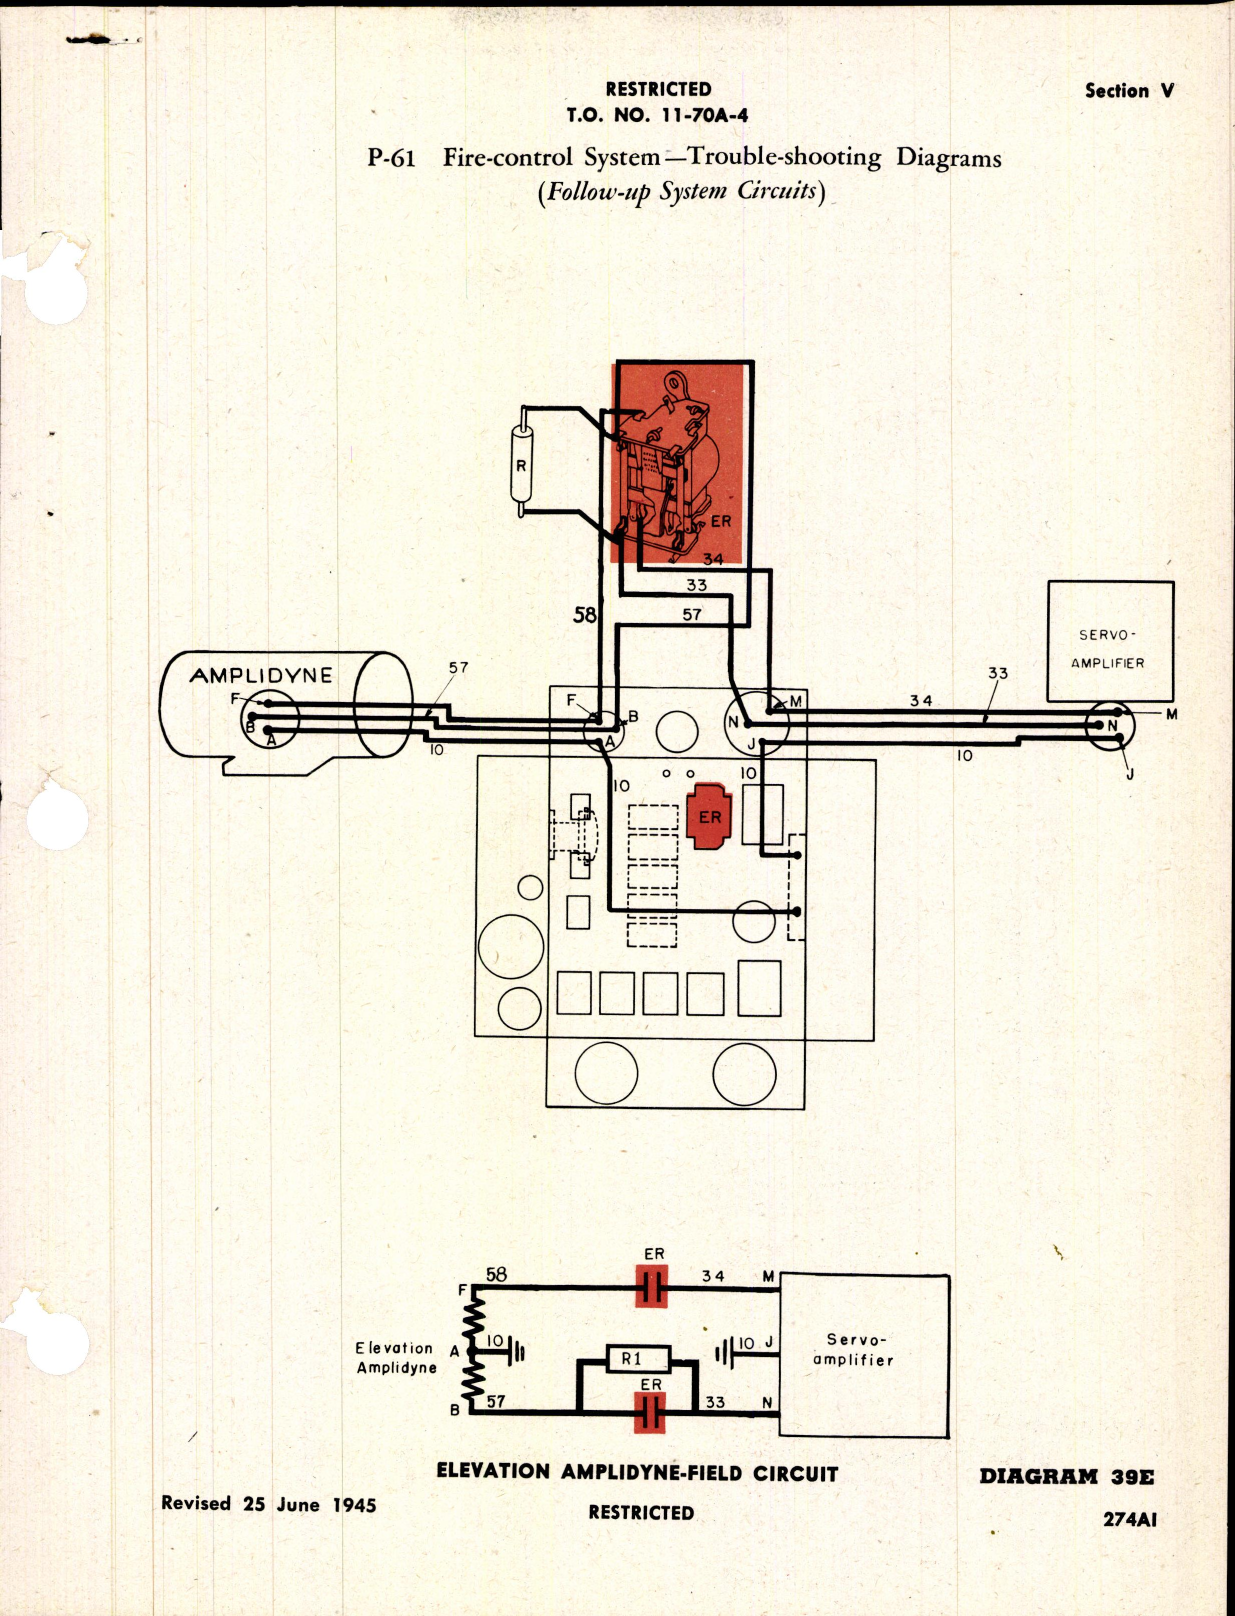 Sample page 13 from AirCorps Library document: Operation and Service Instructions for Central-Station Fire-Control System for P-61